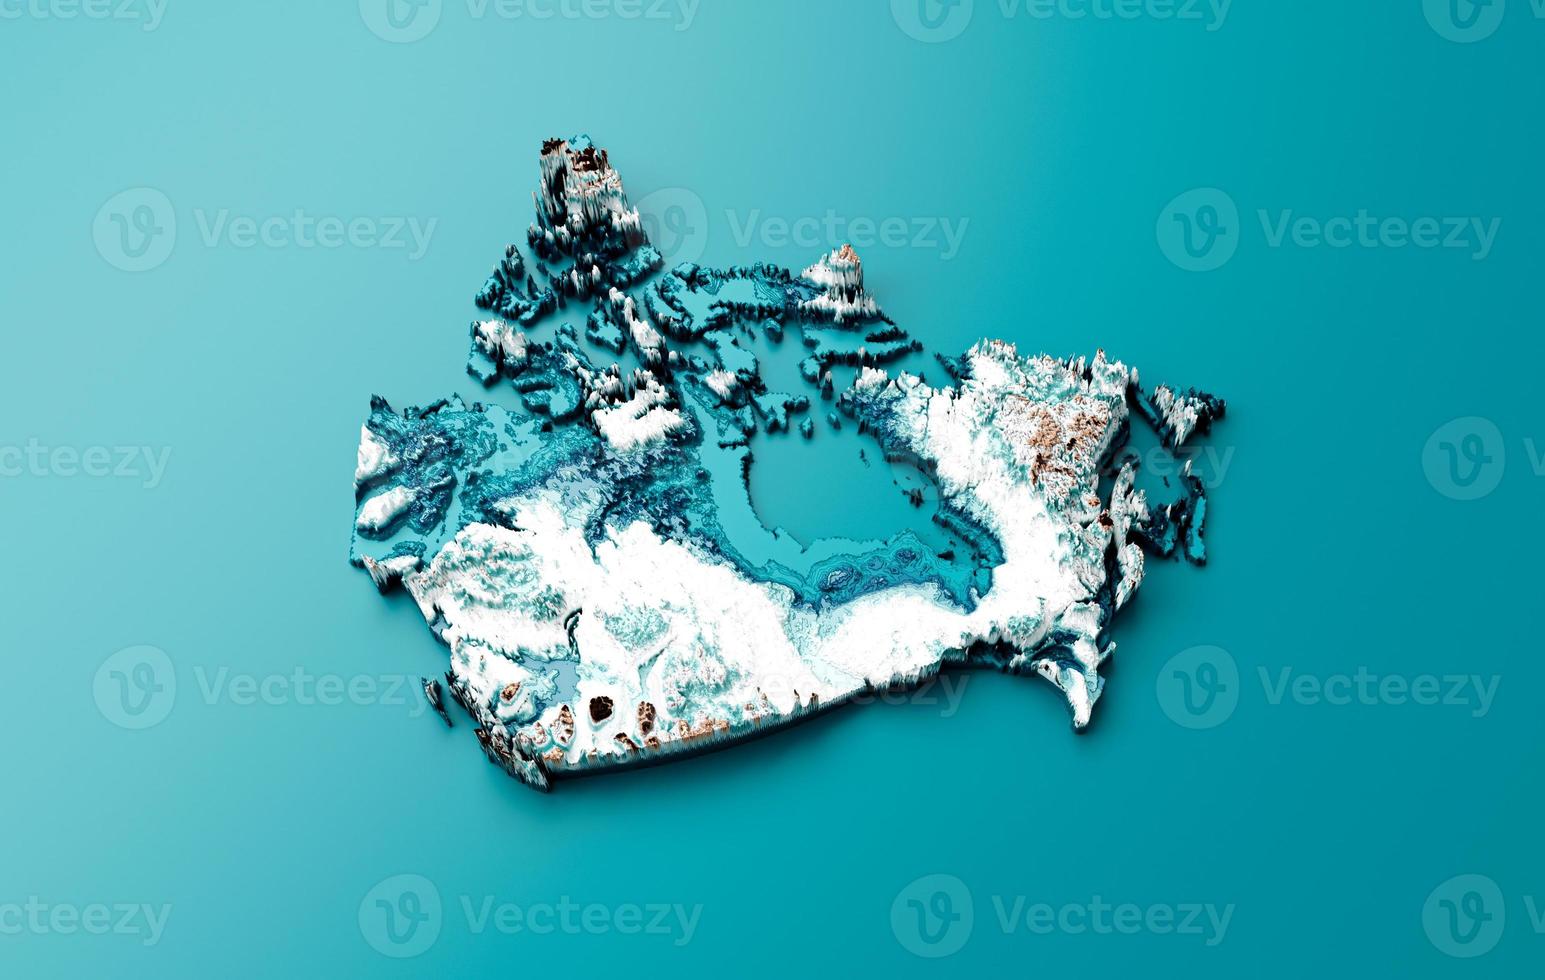 Topographic Canada Map Hypsometric Elevation tint Spectral Shaded relief map 3d illustration photo